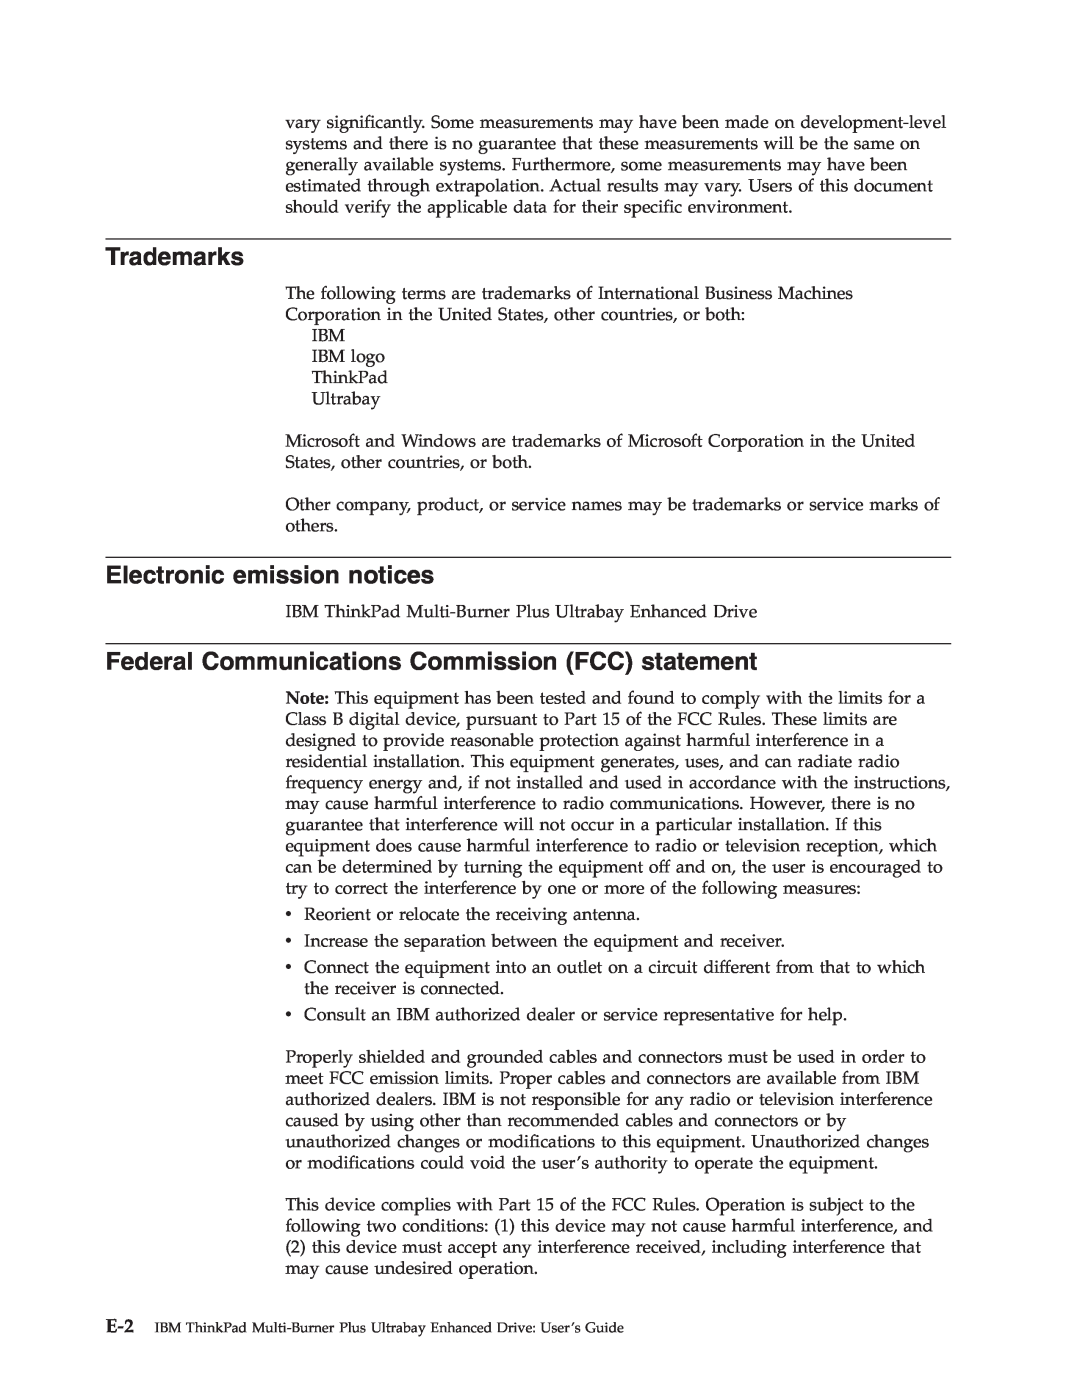 IBM 73P3315 manual Trademarks, Electronic emission notices, Federal Communications Commission FCC statement 